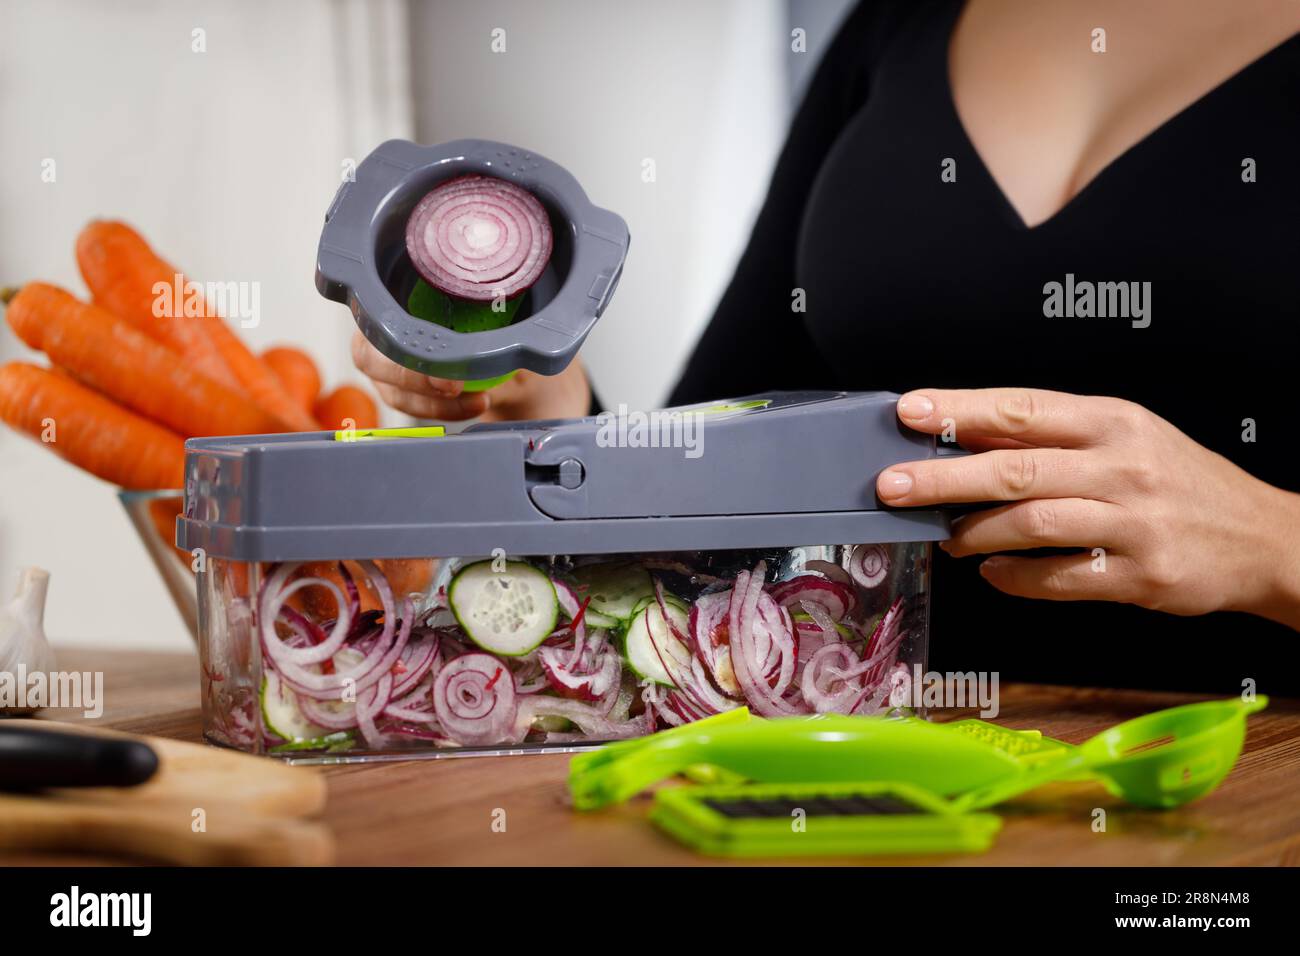 Woman in kitchen creating a salad meal, emphasizing a healthy lifestyle. Stock Photo